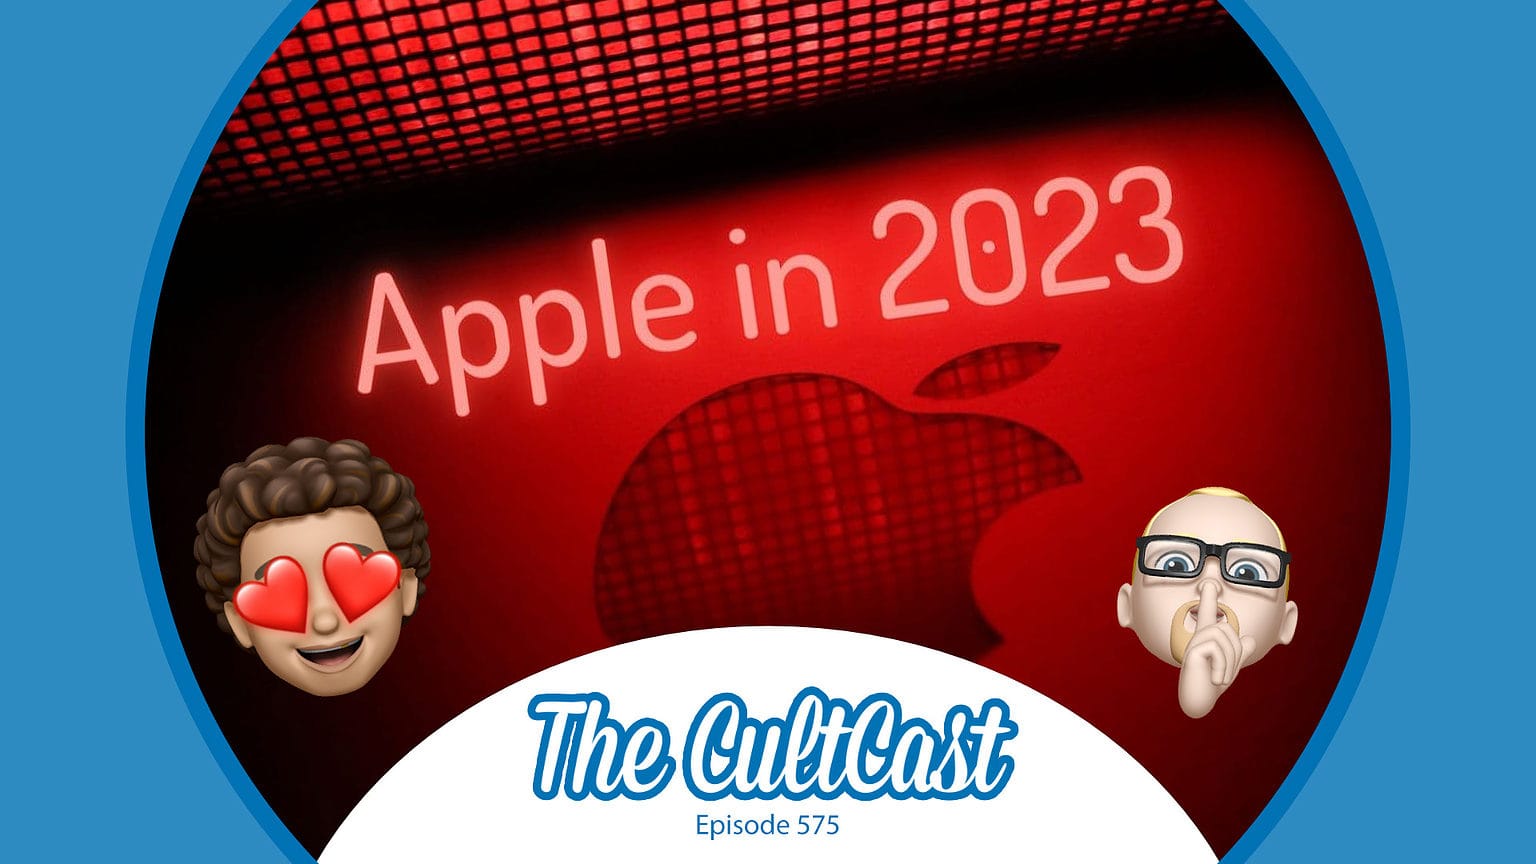 This year was good for Apple, but 2023 looks even better!